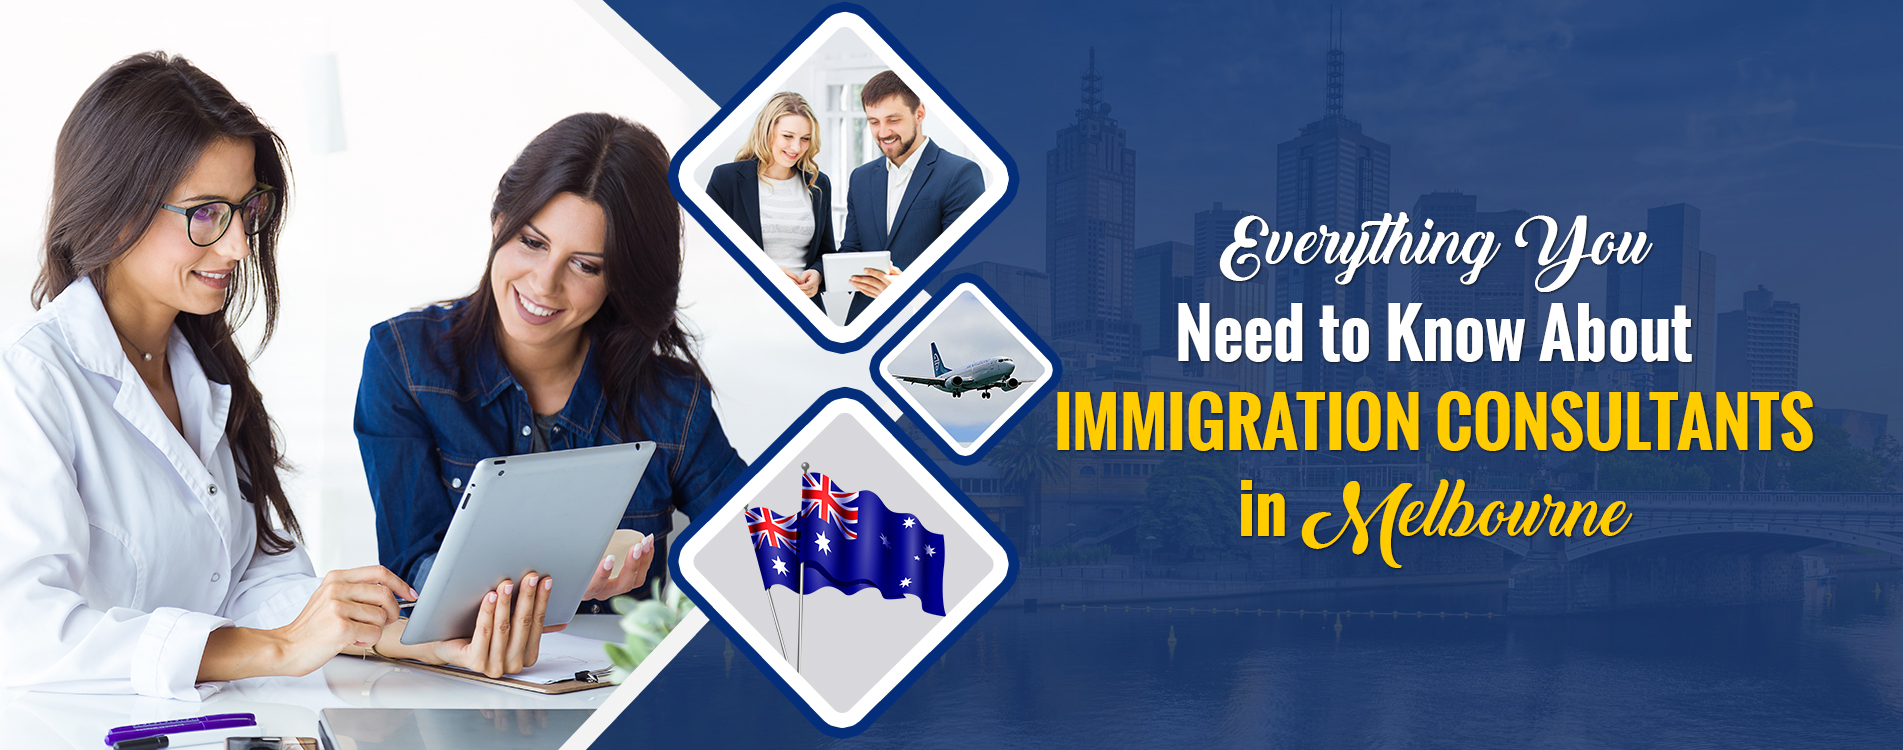 Everything You Need to Know About Immigration Consultants in Melbourne